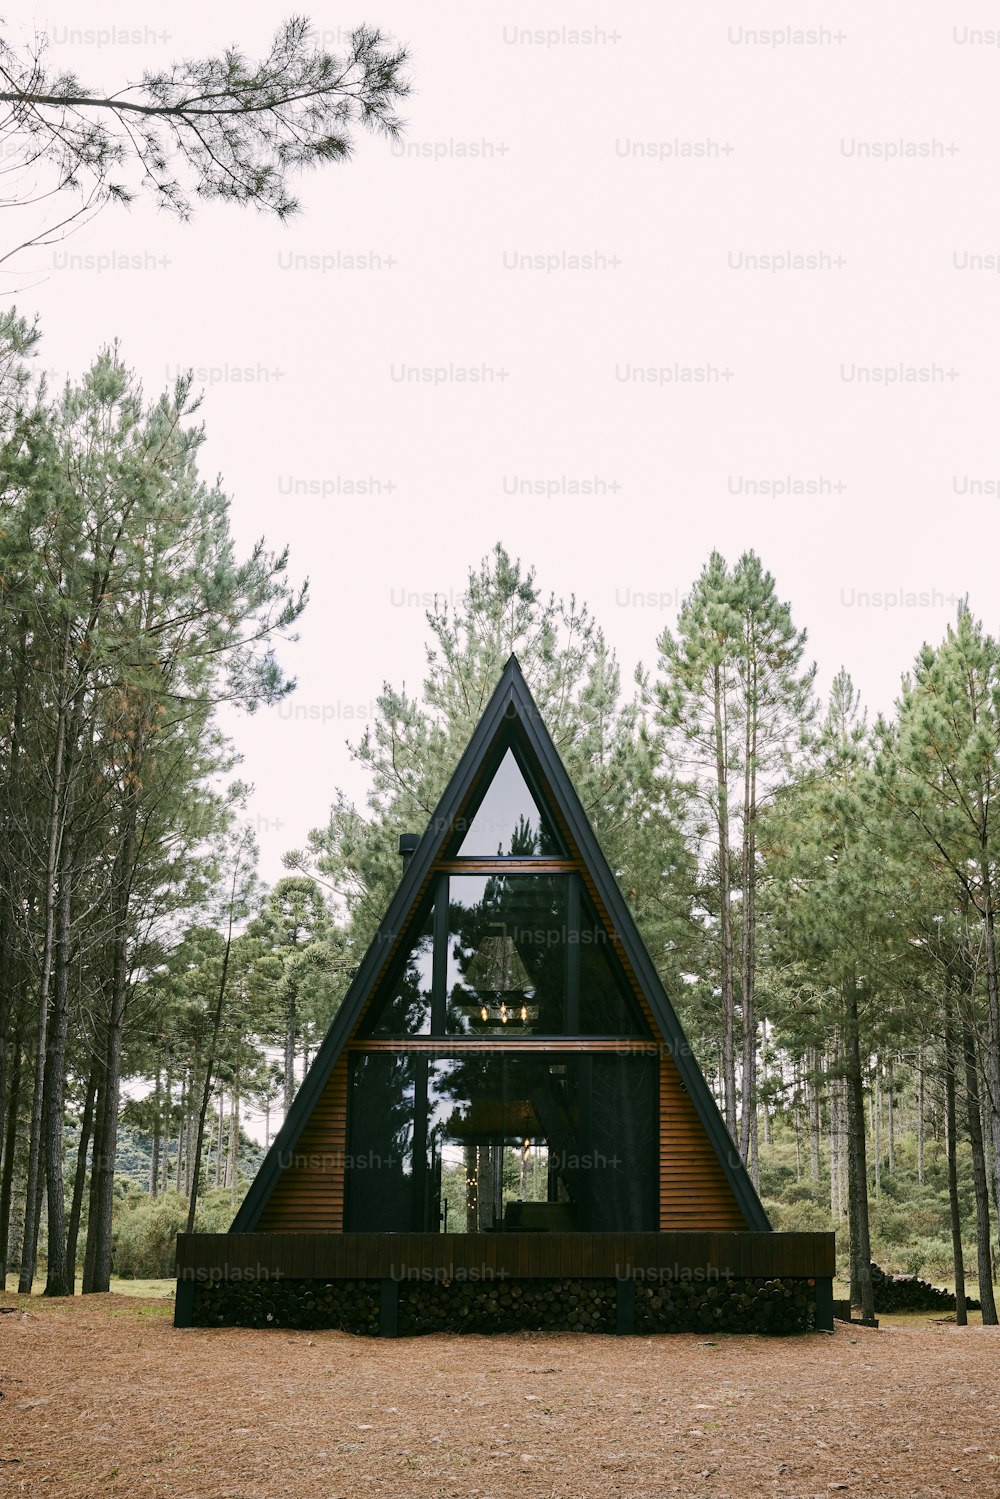 a - frame cabin in the middle of a forest